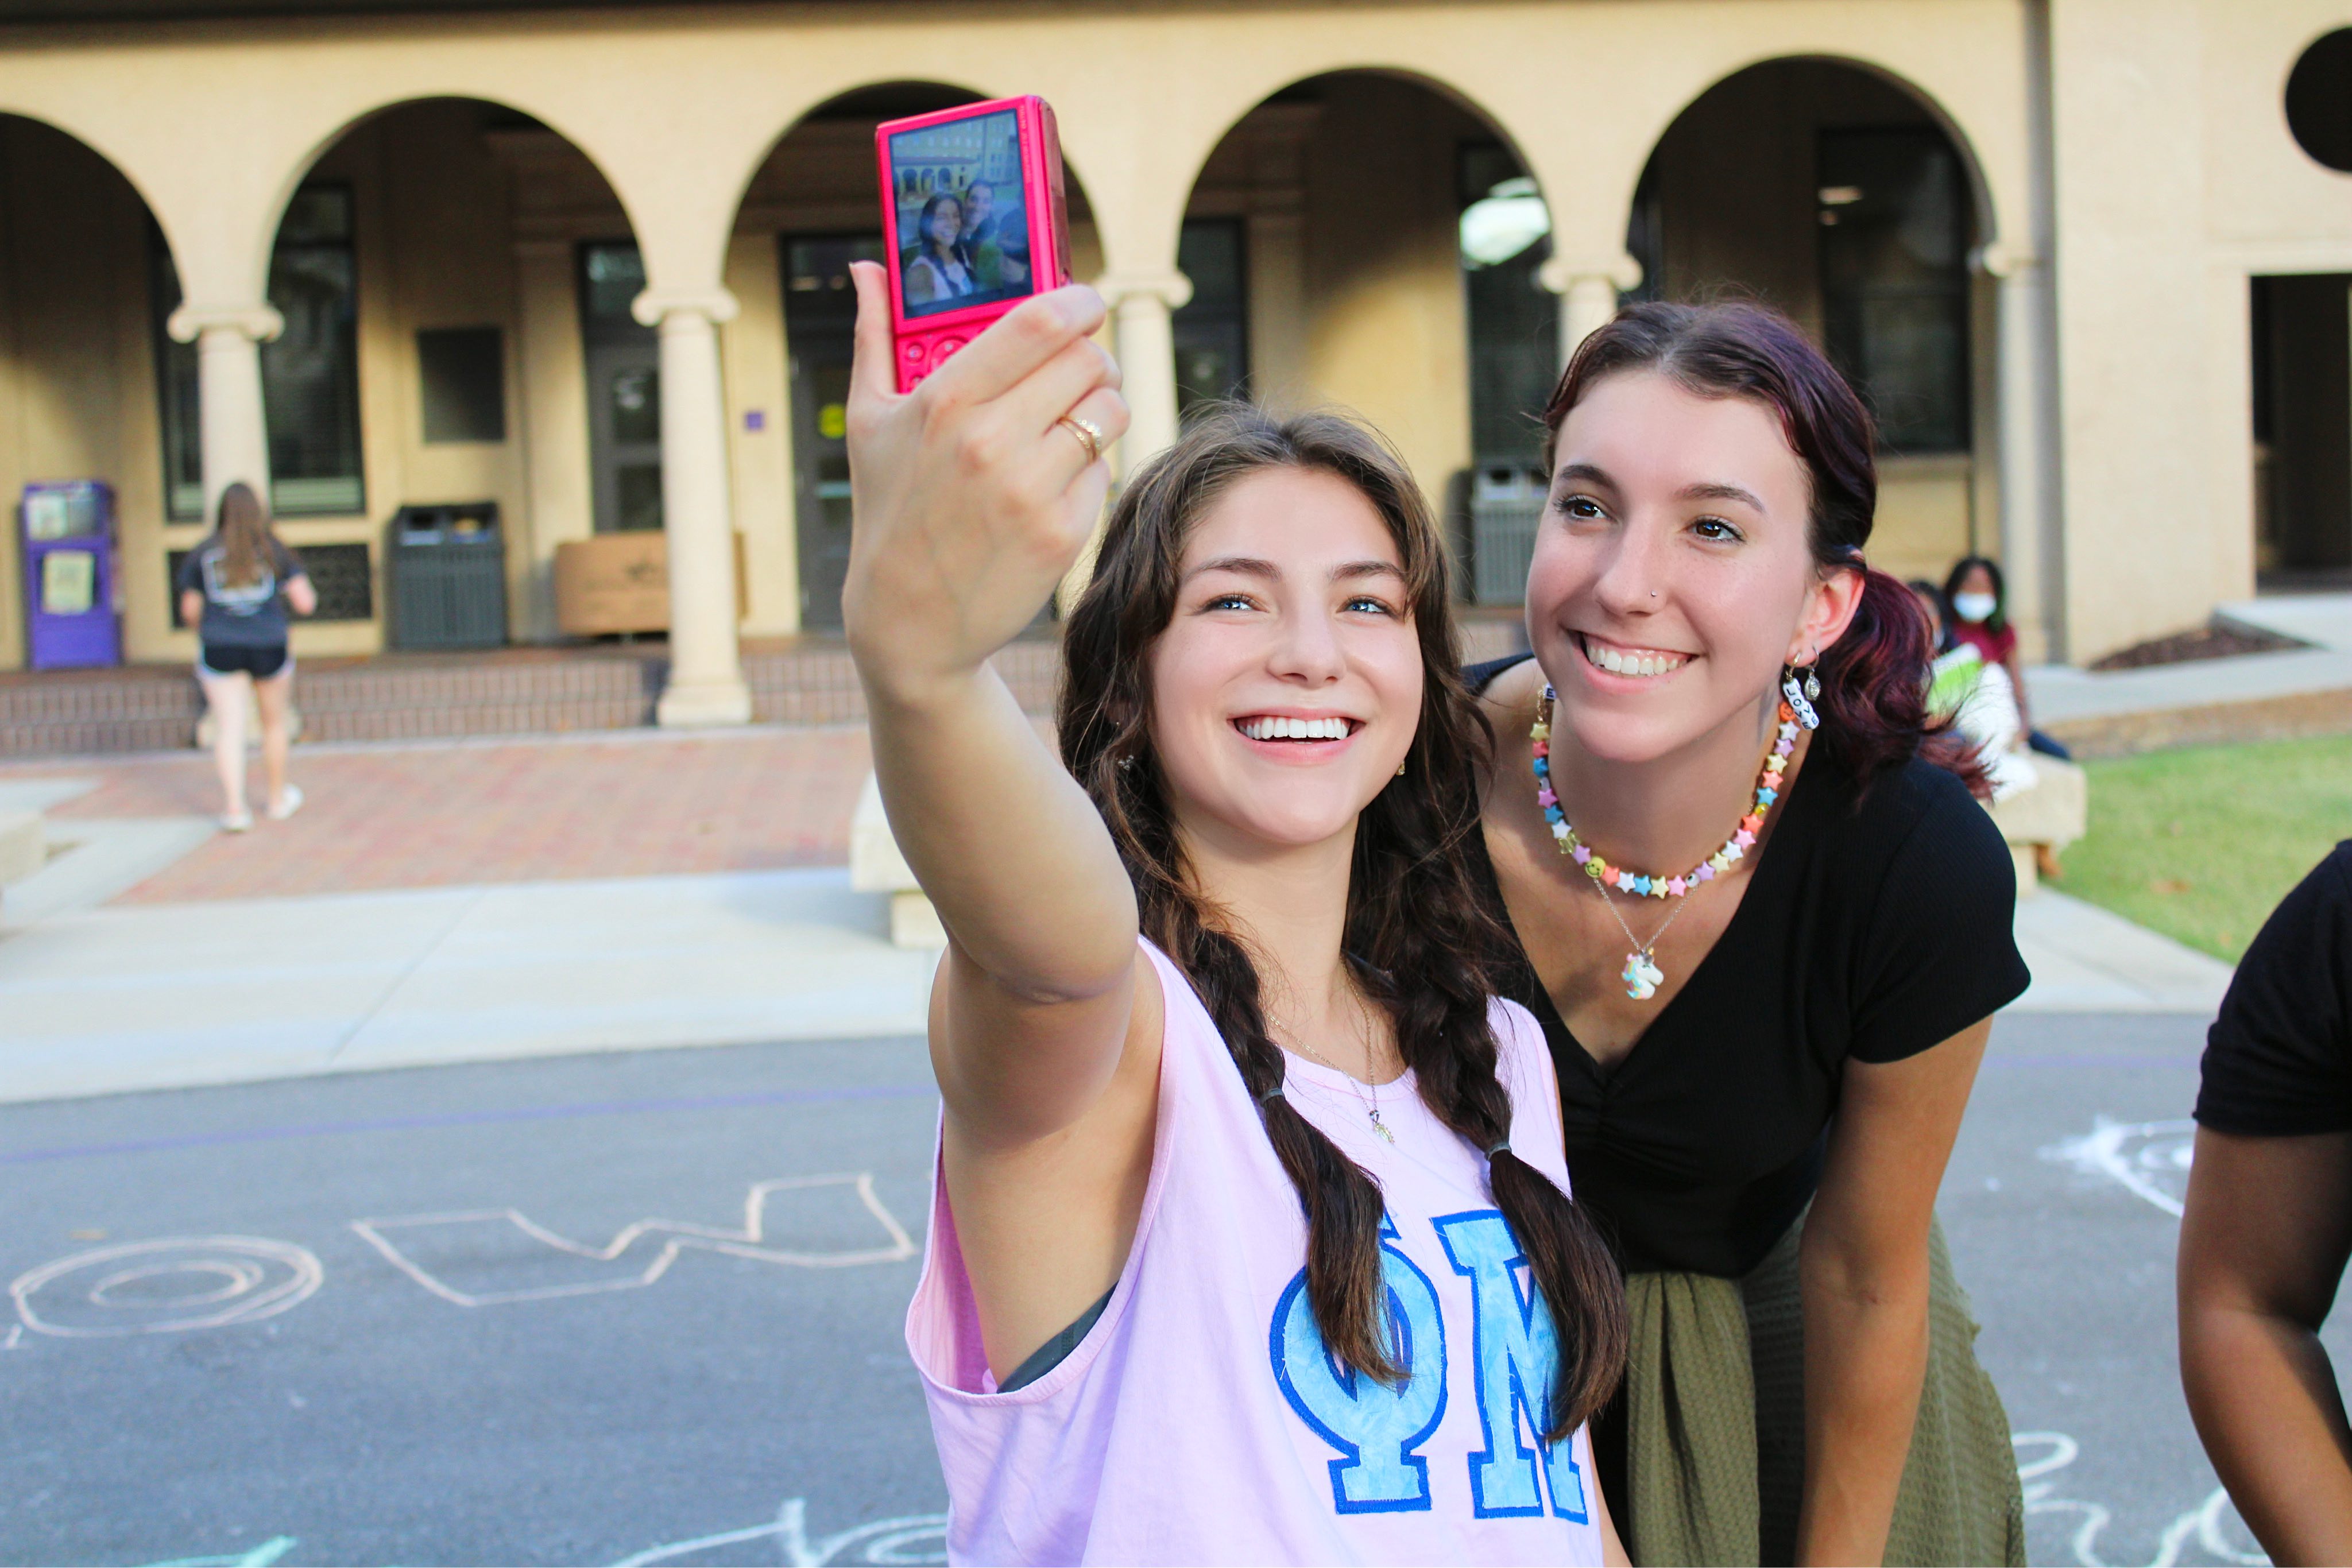 Students taking a selfie with a camera.